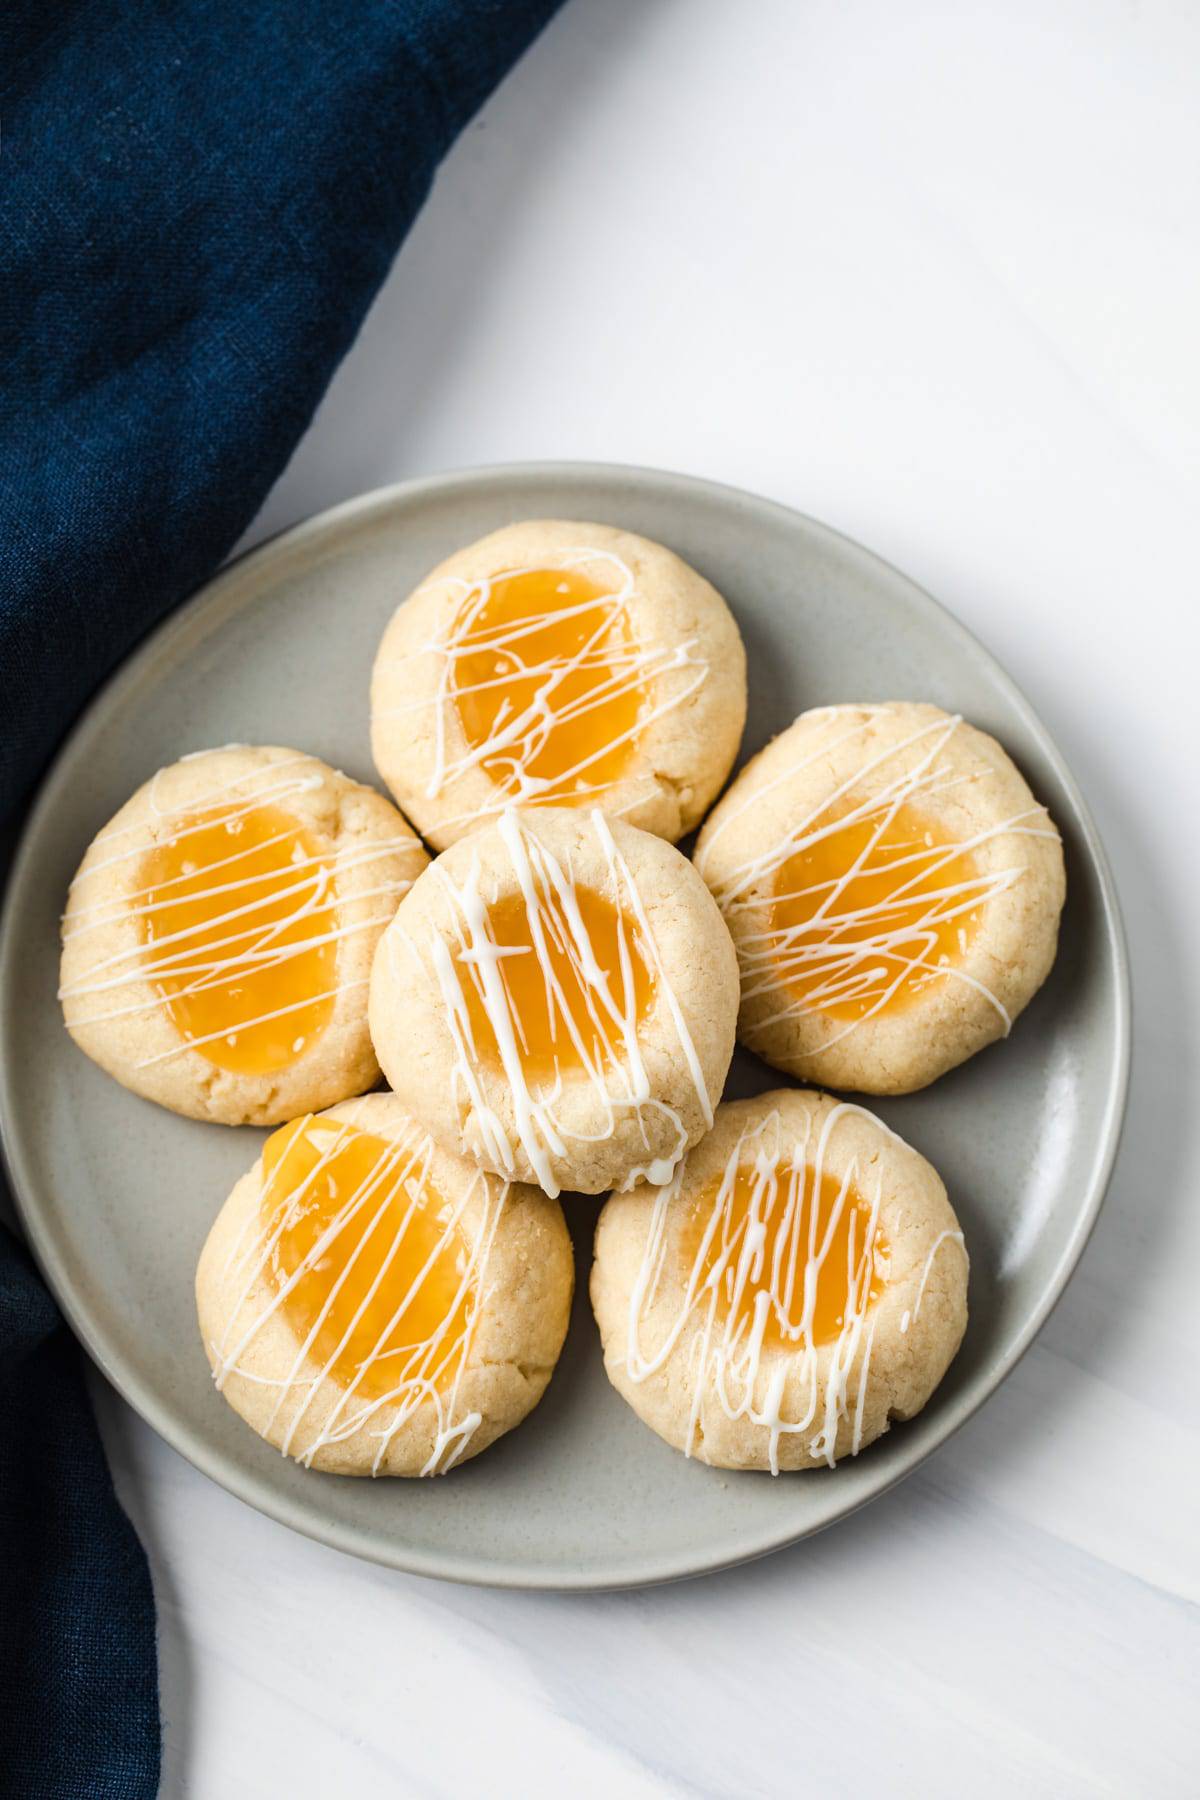 lemon filled cookies on a gray plate